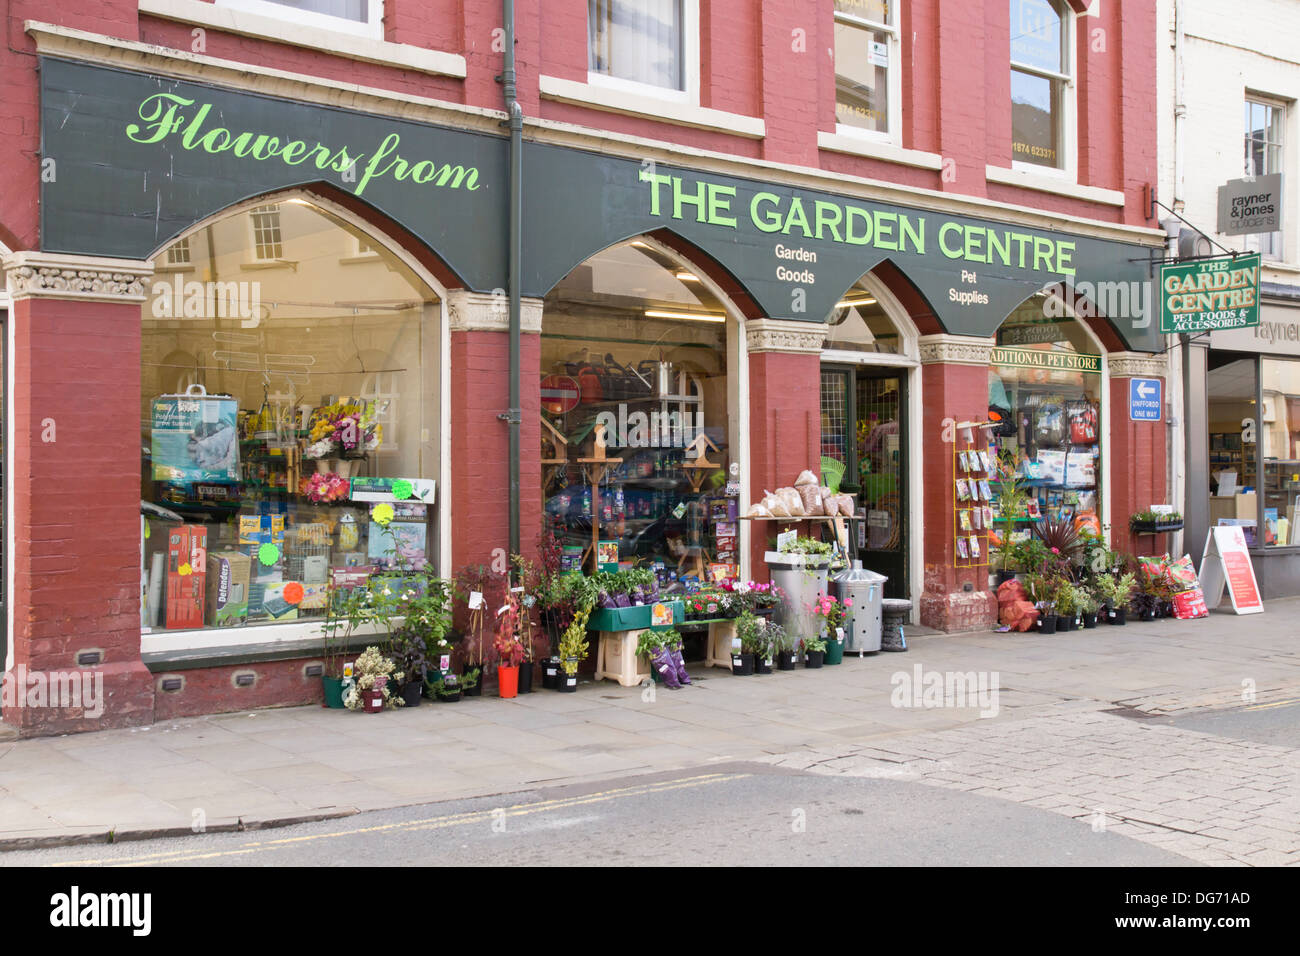 Brecon a small rural town in Powys Wales UK  The Garden Centre Shop Stock Photo